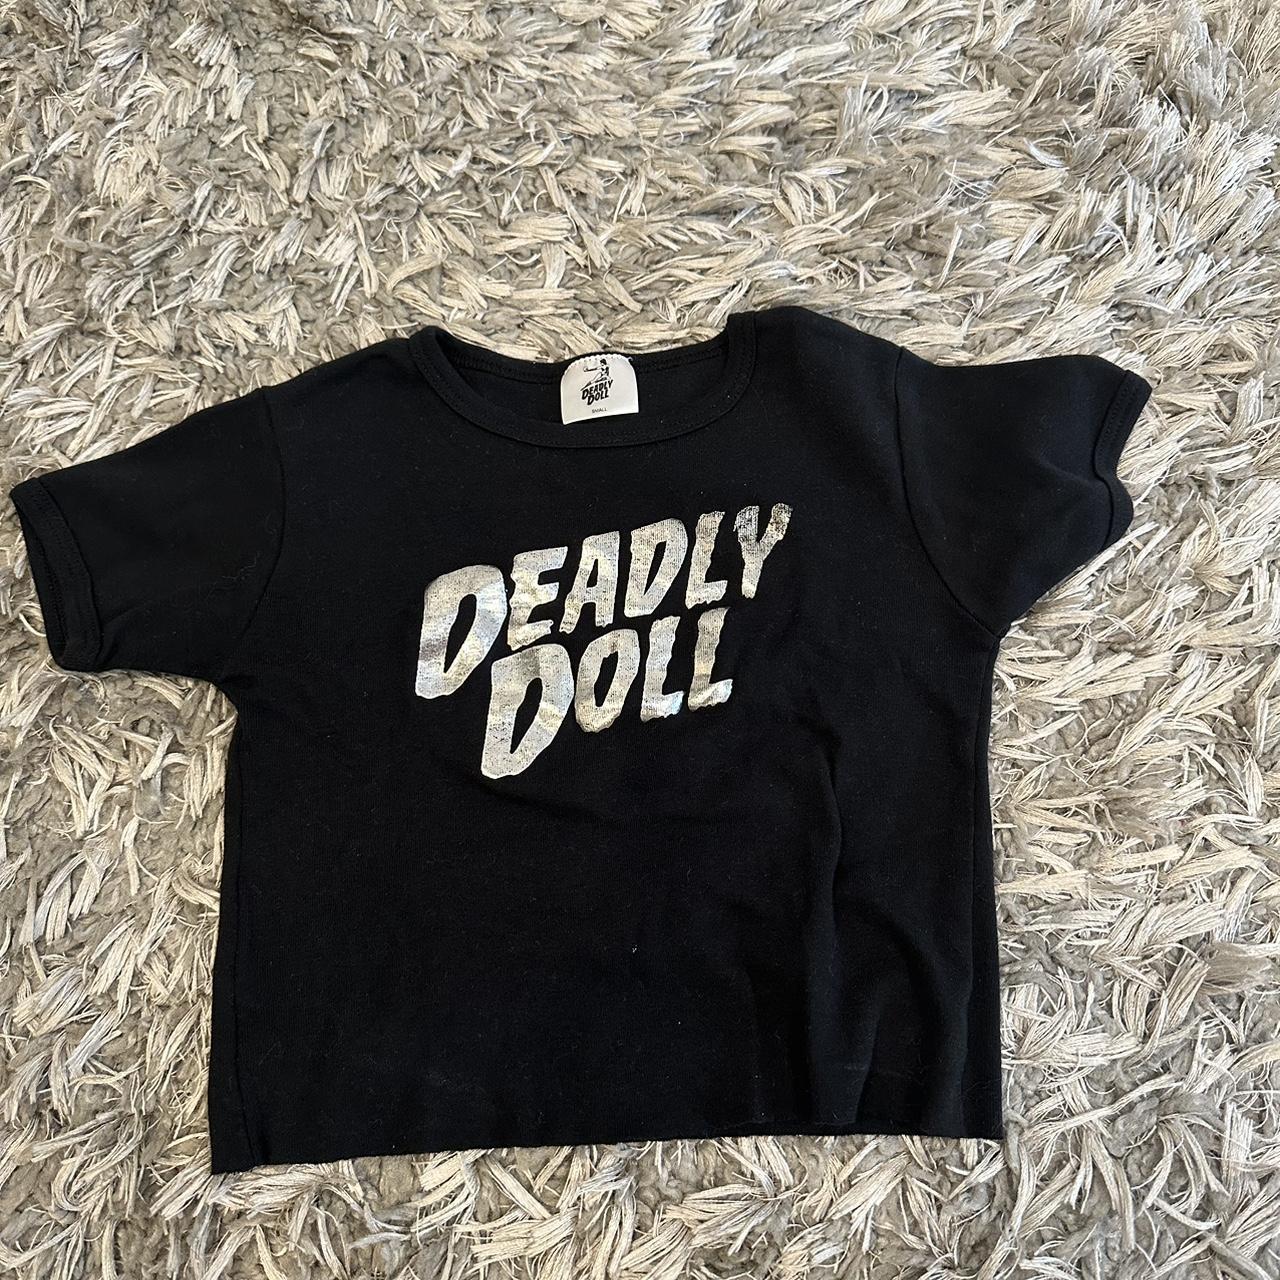 SOLD DO NOT BUY, Deadly doll baby tshirt , Size...